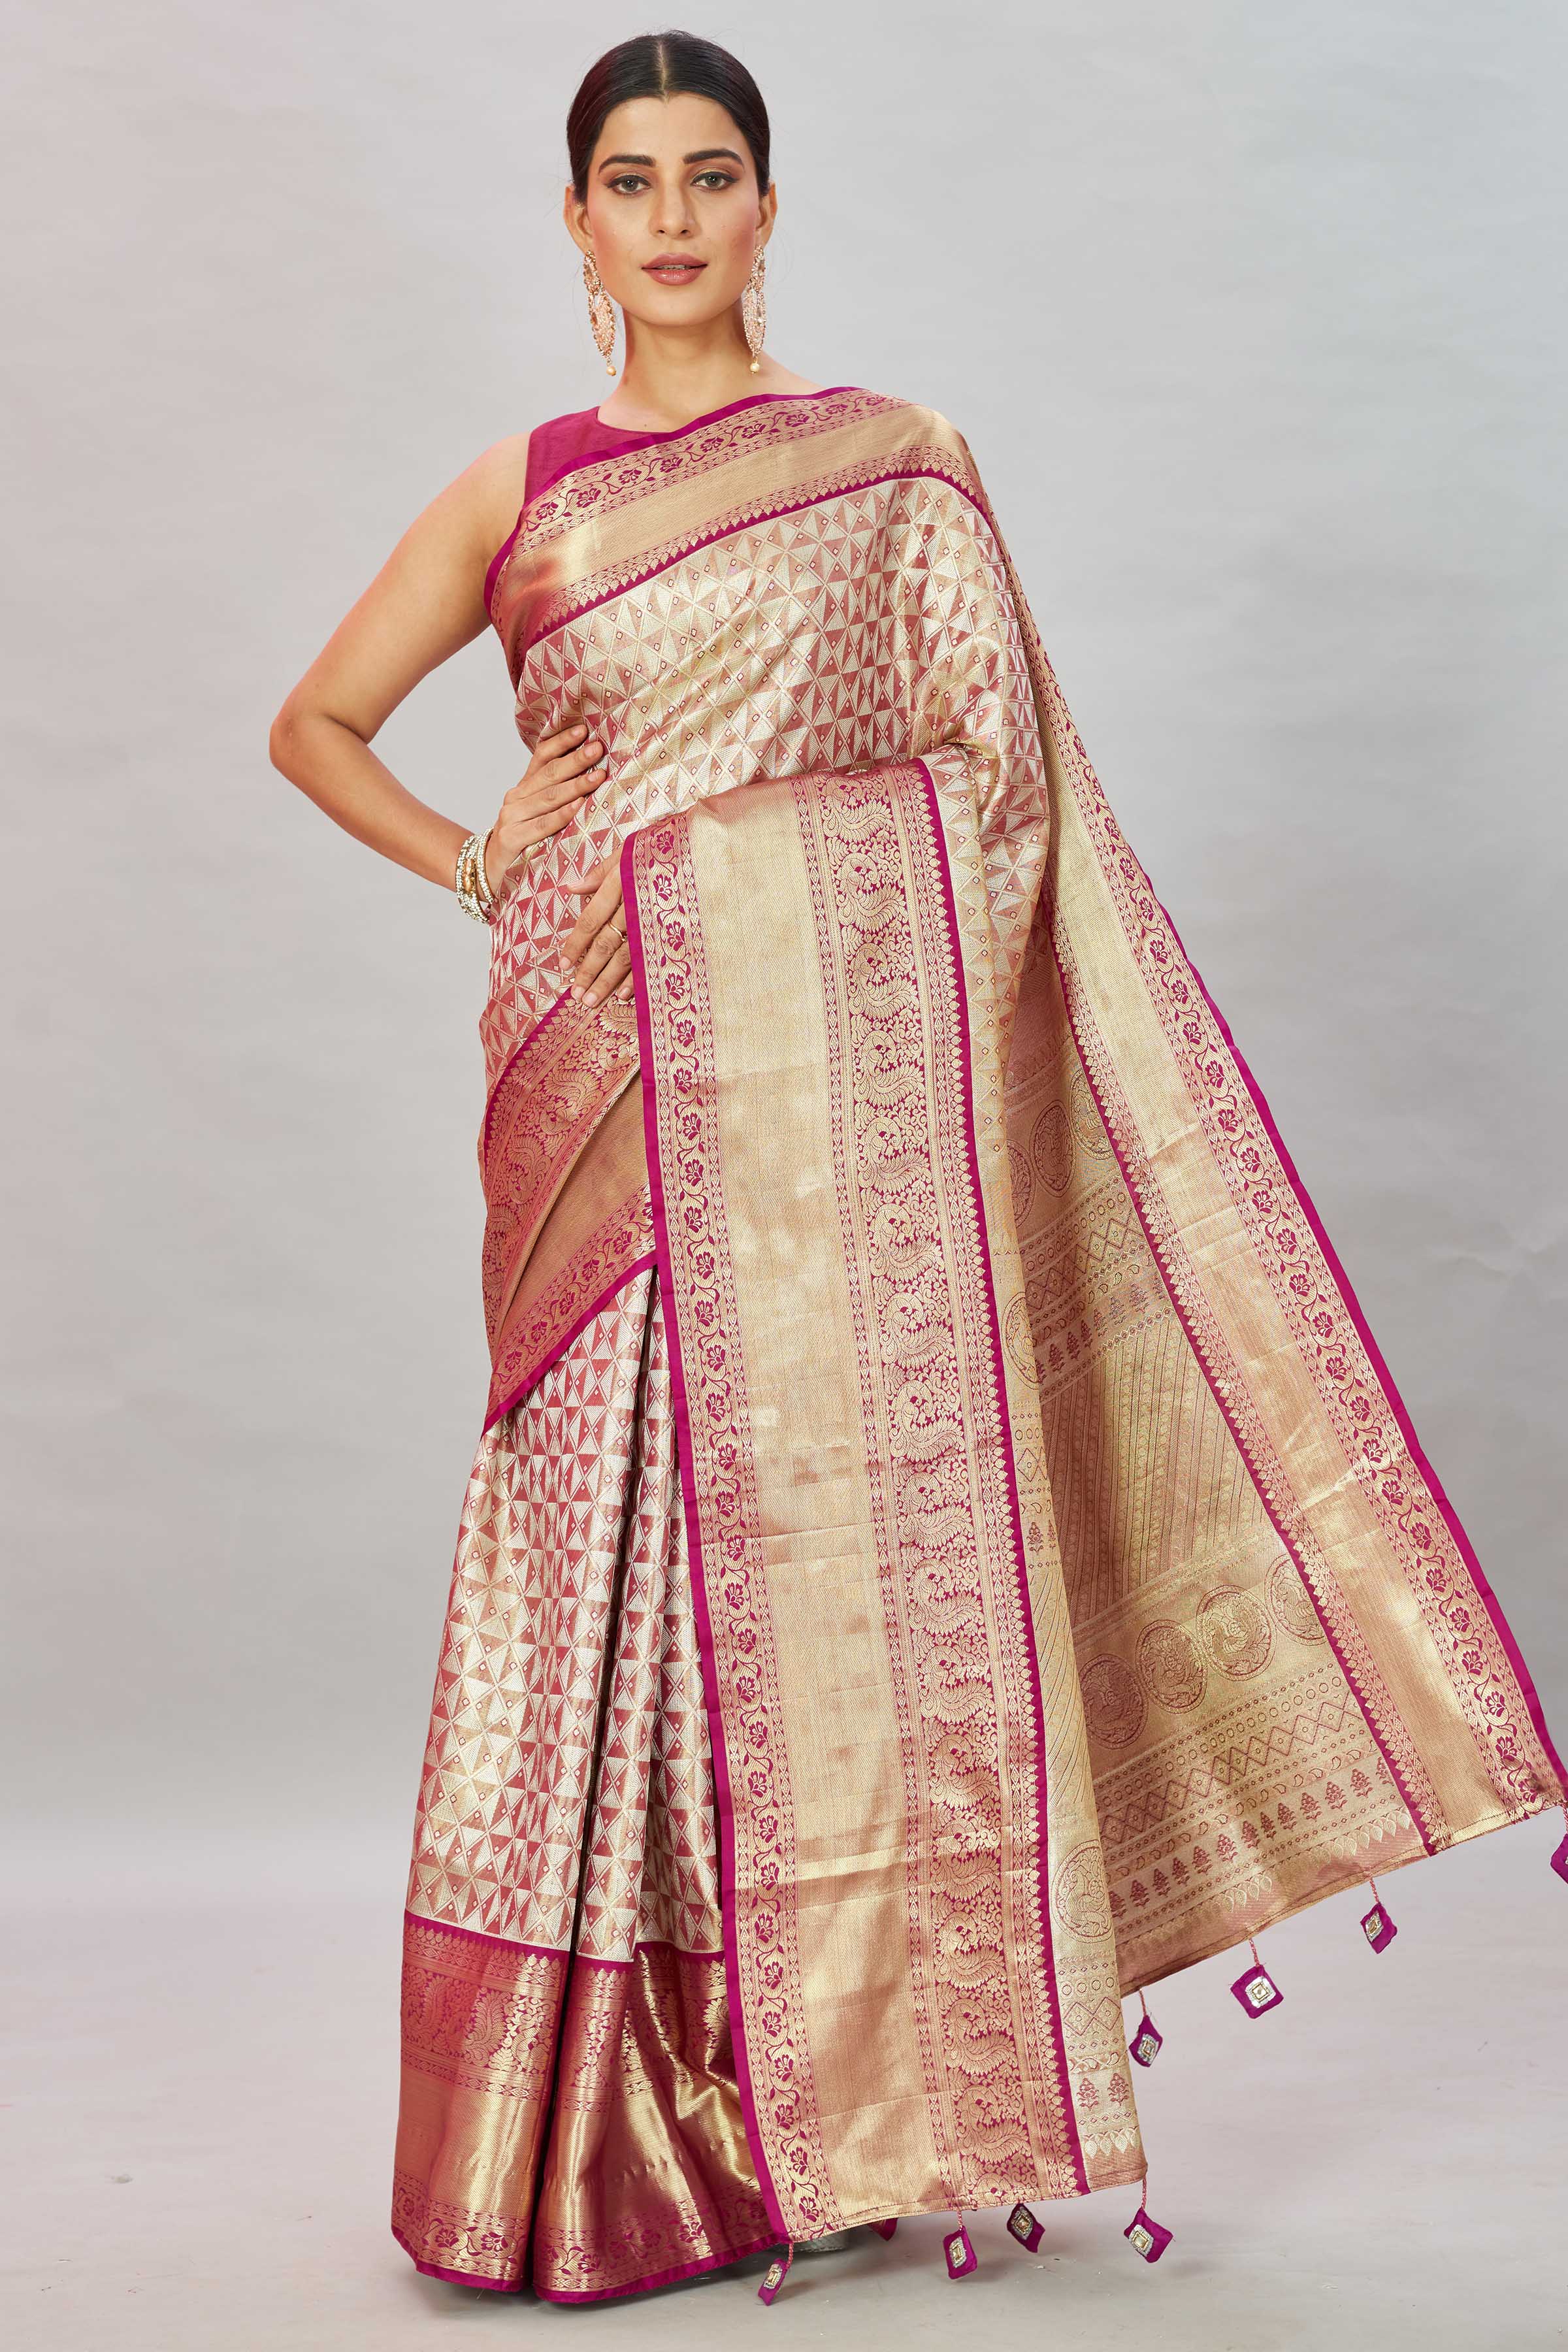 Shop golden pink heavy Kanjivaram silk sari online in USA. Look your best on festive occasions in latest designer sarees, pure silk sarees, Kanjivaram silk saris, handwoven saris, tussar silk sarees, embroidered saris from Pure Elegance Indian clothing store in USA.-full view